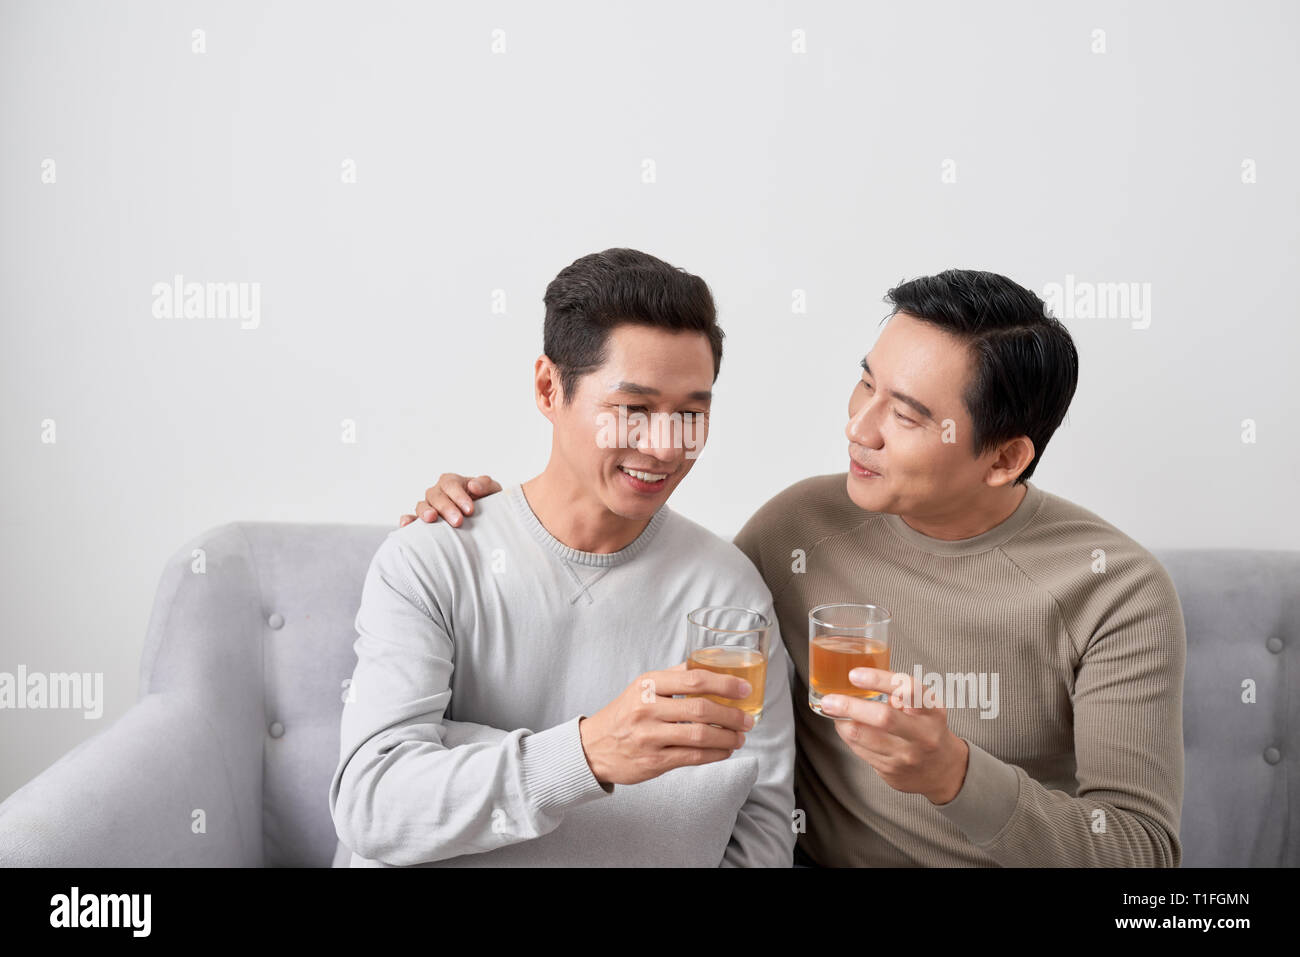 Men talk concept. Two young male friend gathering, chatting and eating at home. Stock Photo